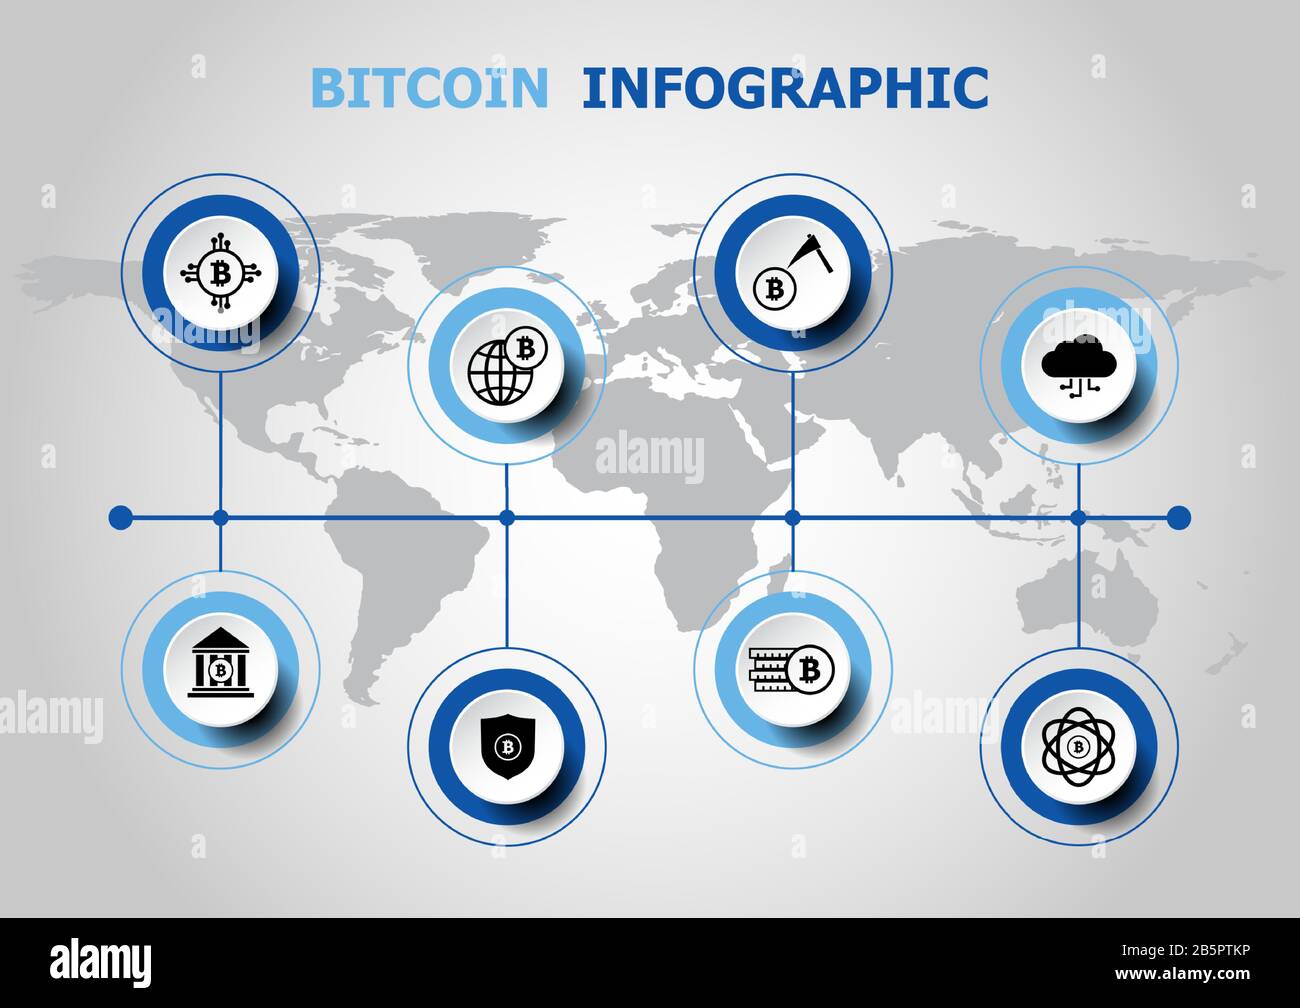 Infographic design with bitcoin icons, stock vector Stock Vector